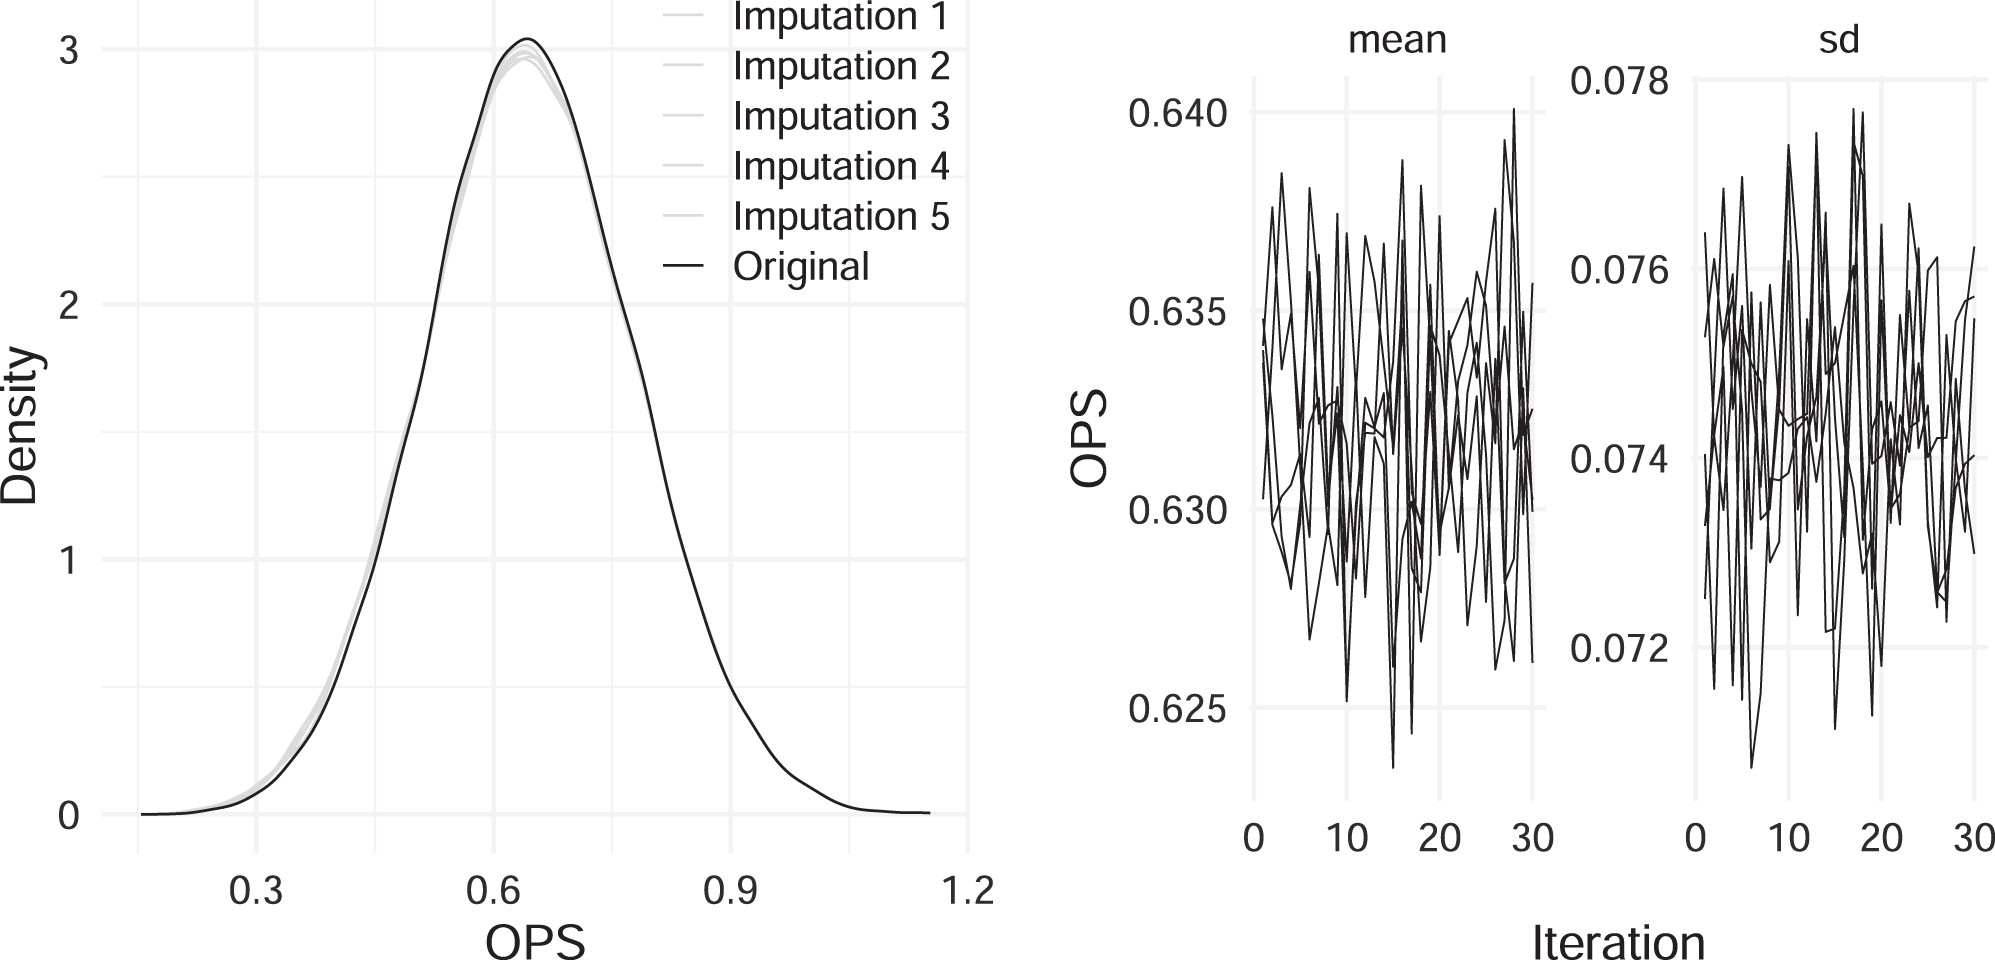 Left: Kernel density estimates for the fully observed and imputed OPS values. Right: Trace plots for the mean and standard deviation of the imputed OPS values against the iteration number for the imputed data. Results shown here are for the dropout case of players having OPS average from age 21 to 25 below 0.55.